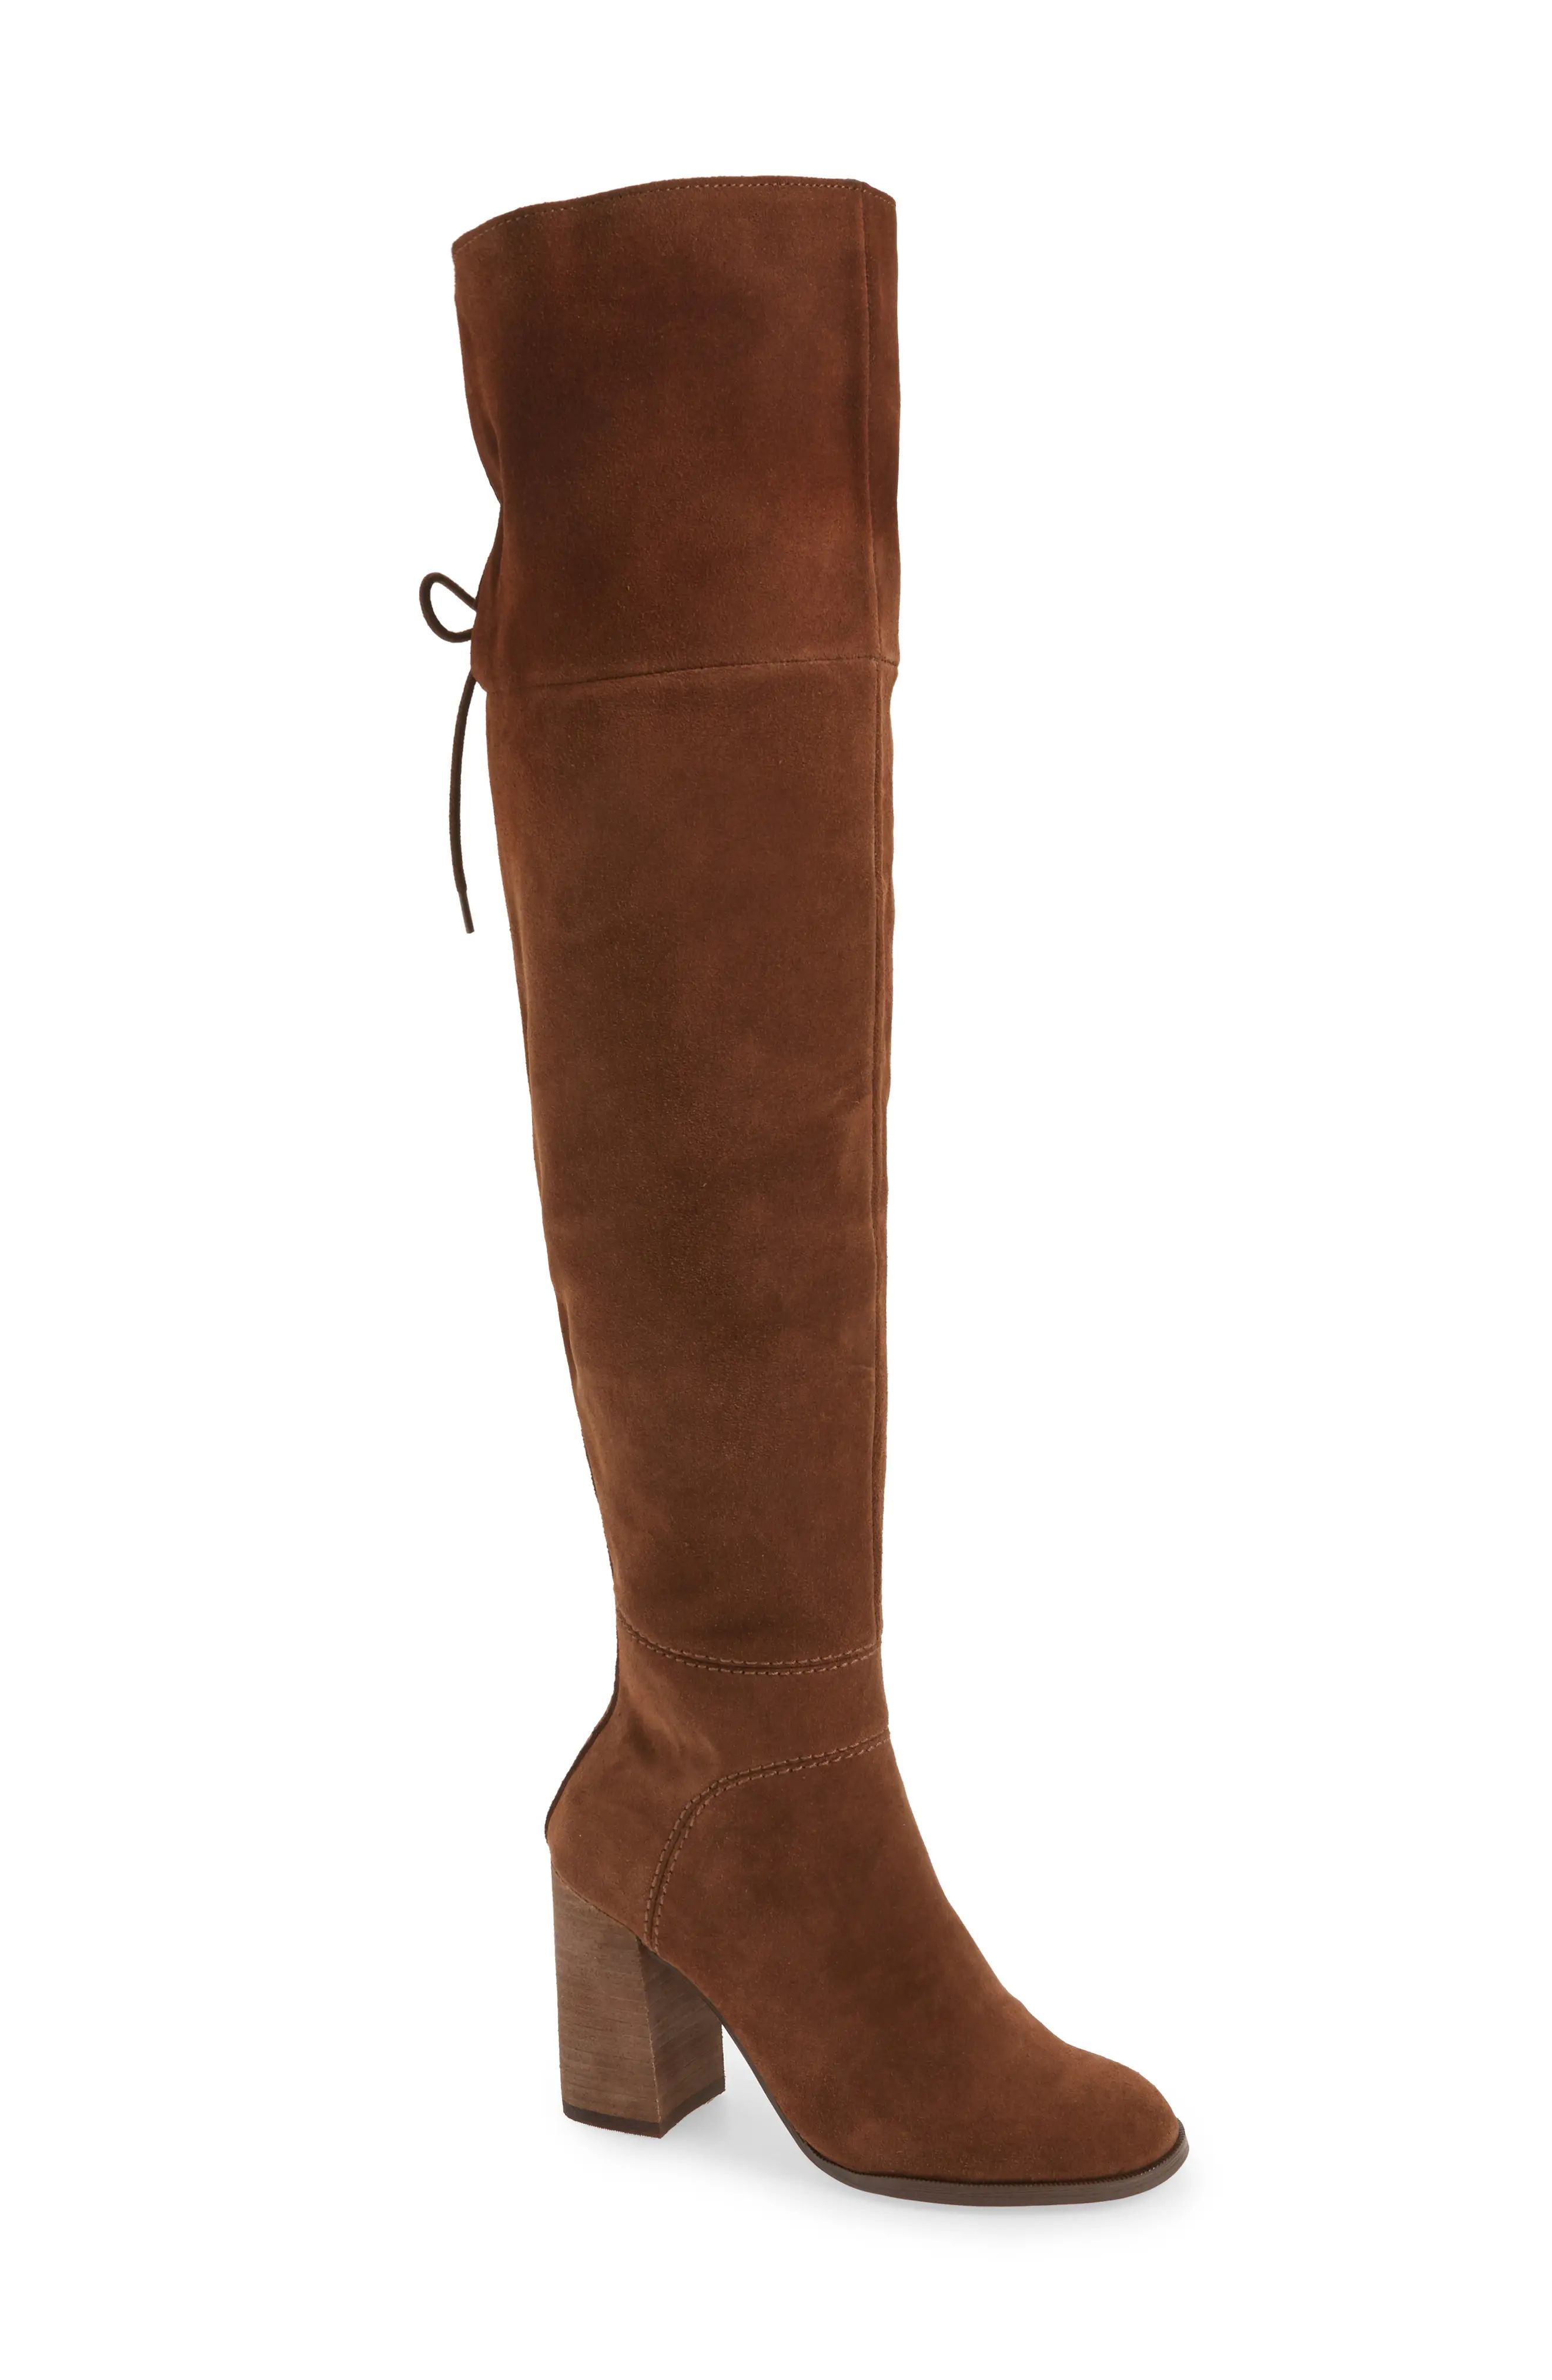 Novela Cuffable Over the Knee Boot | Nordstrom